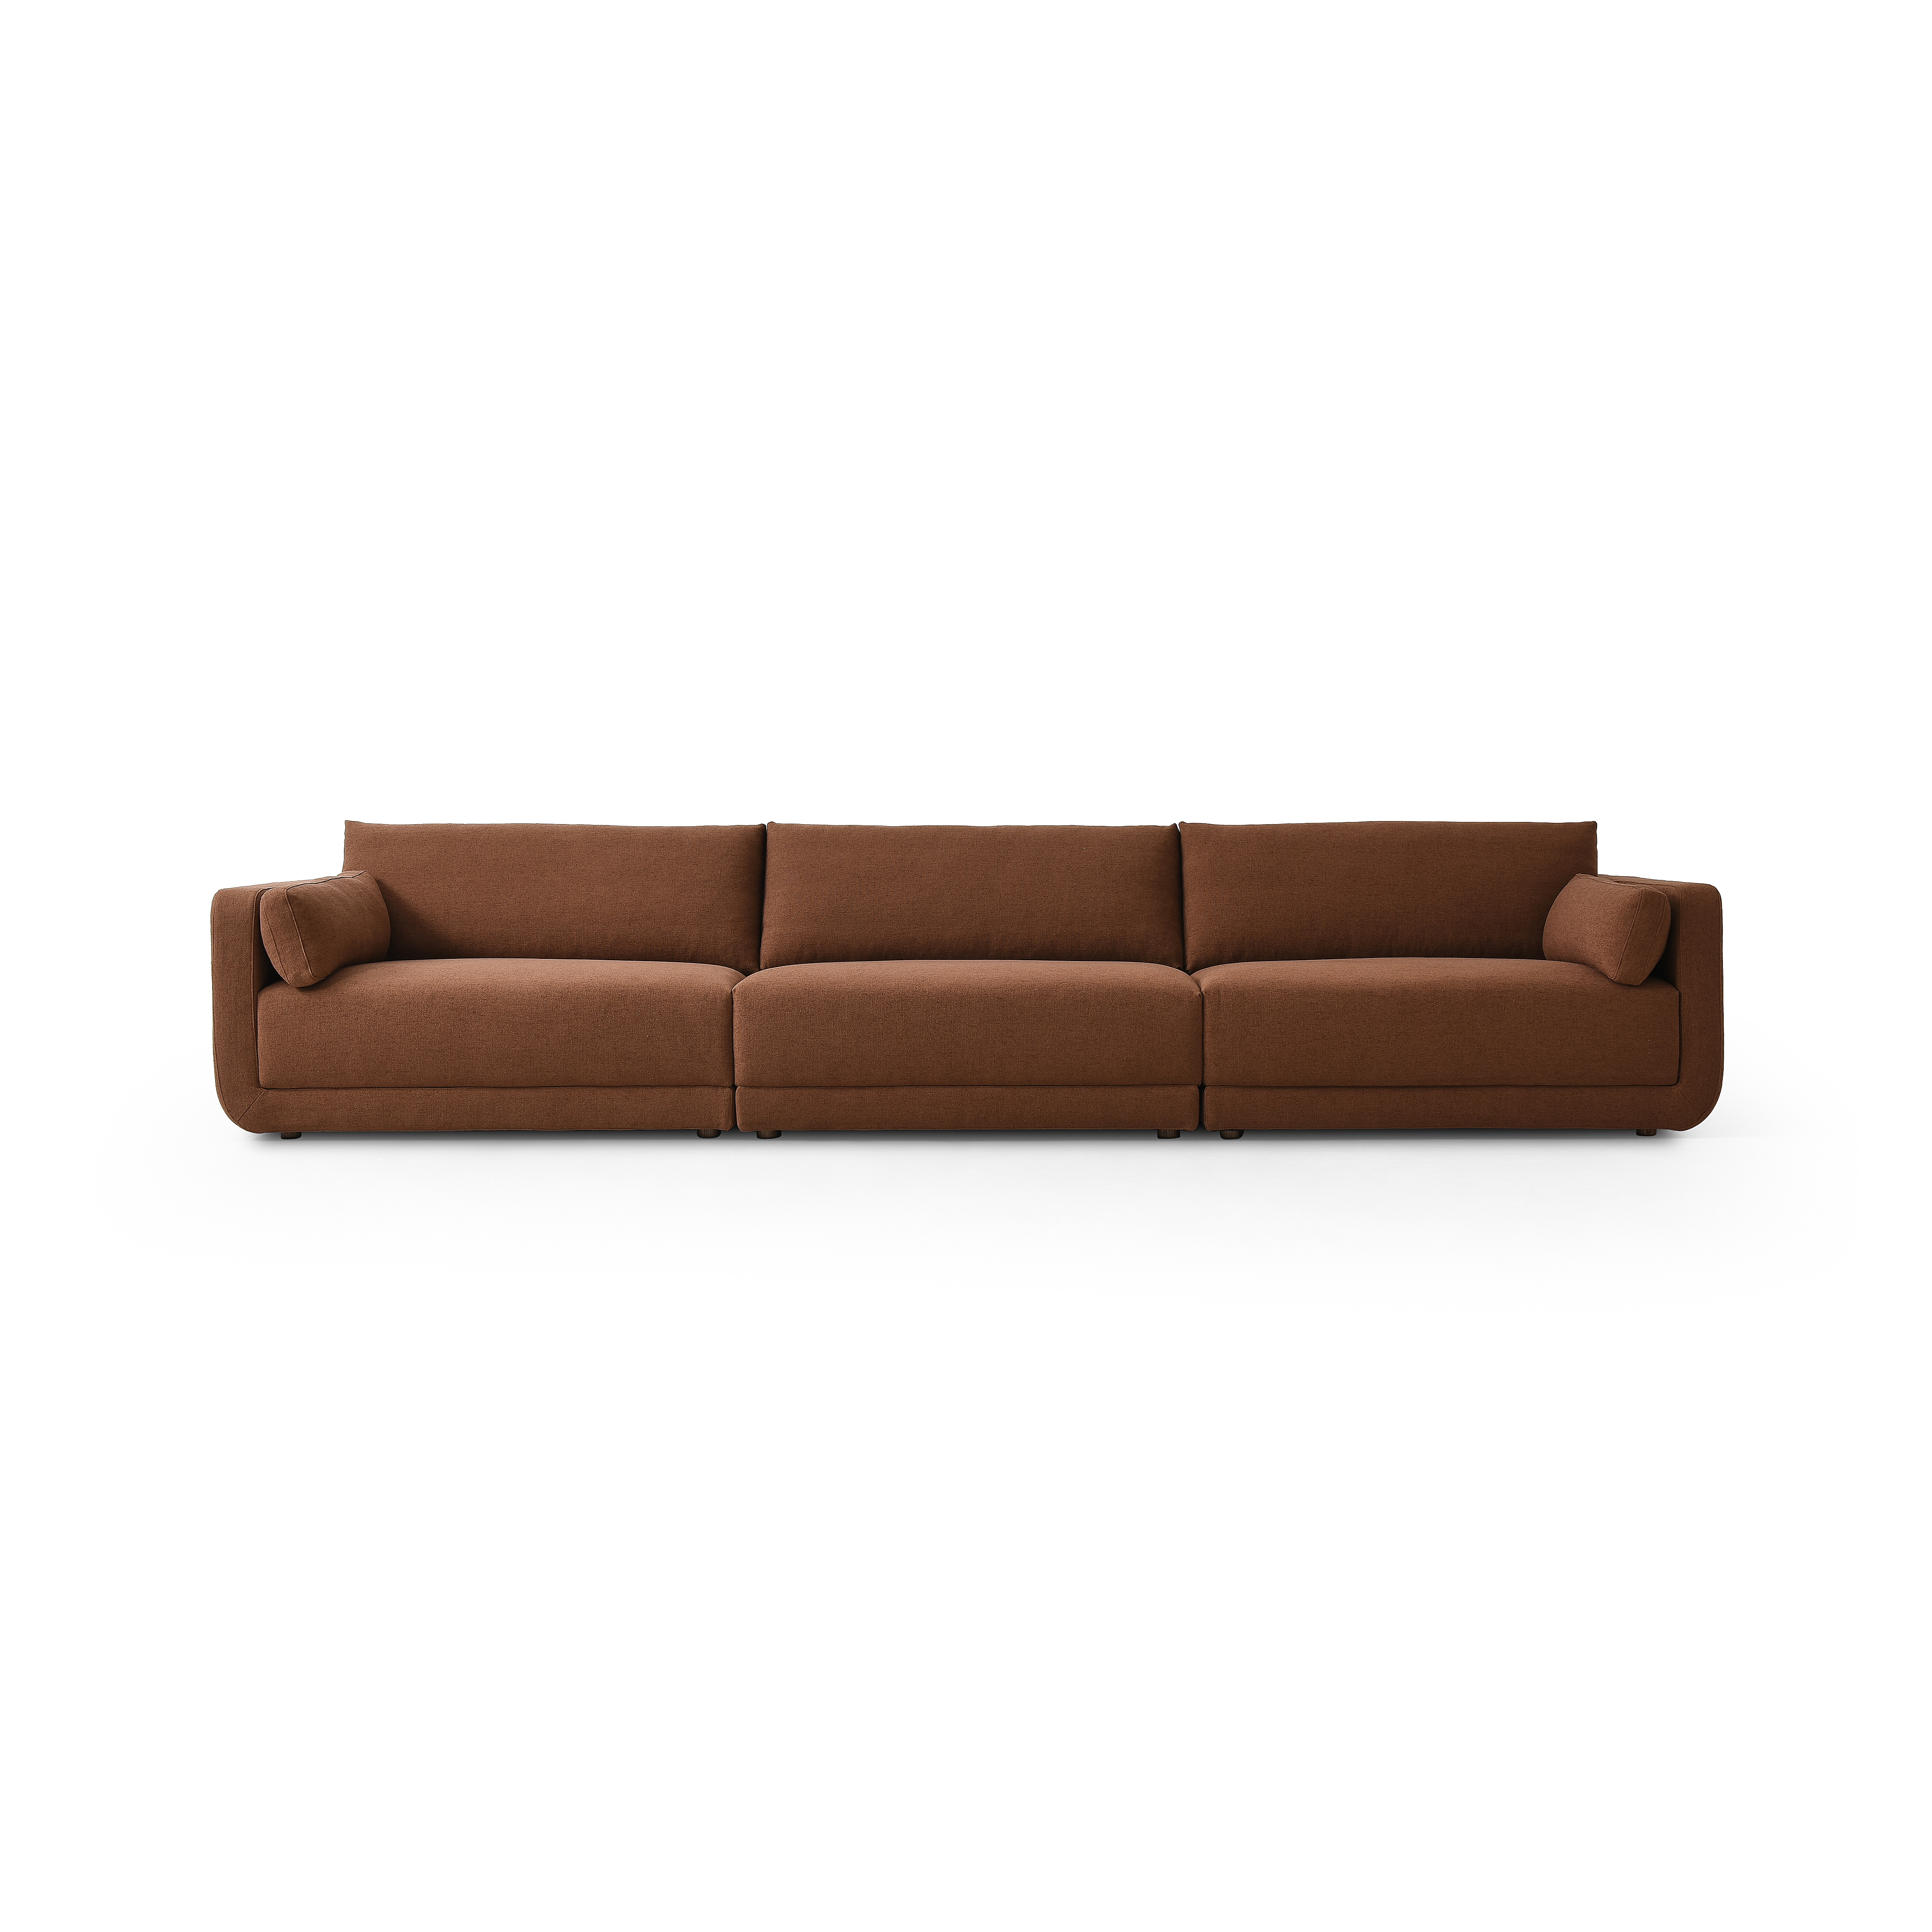 Toland 3pc Sectional-153"-Bartin Rust - Image 2